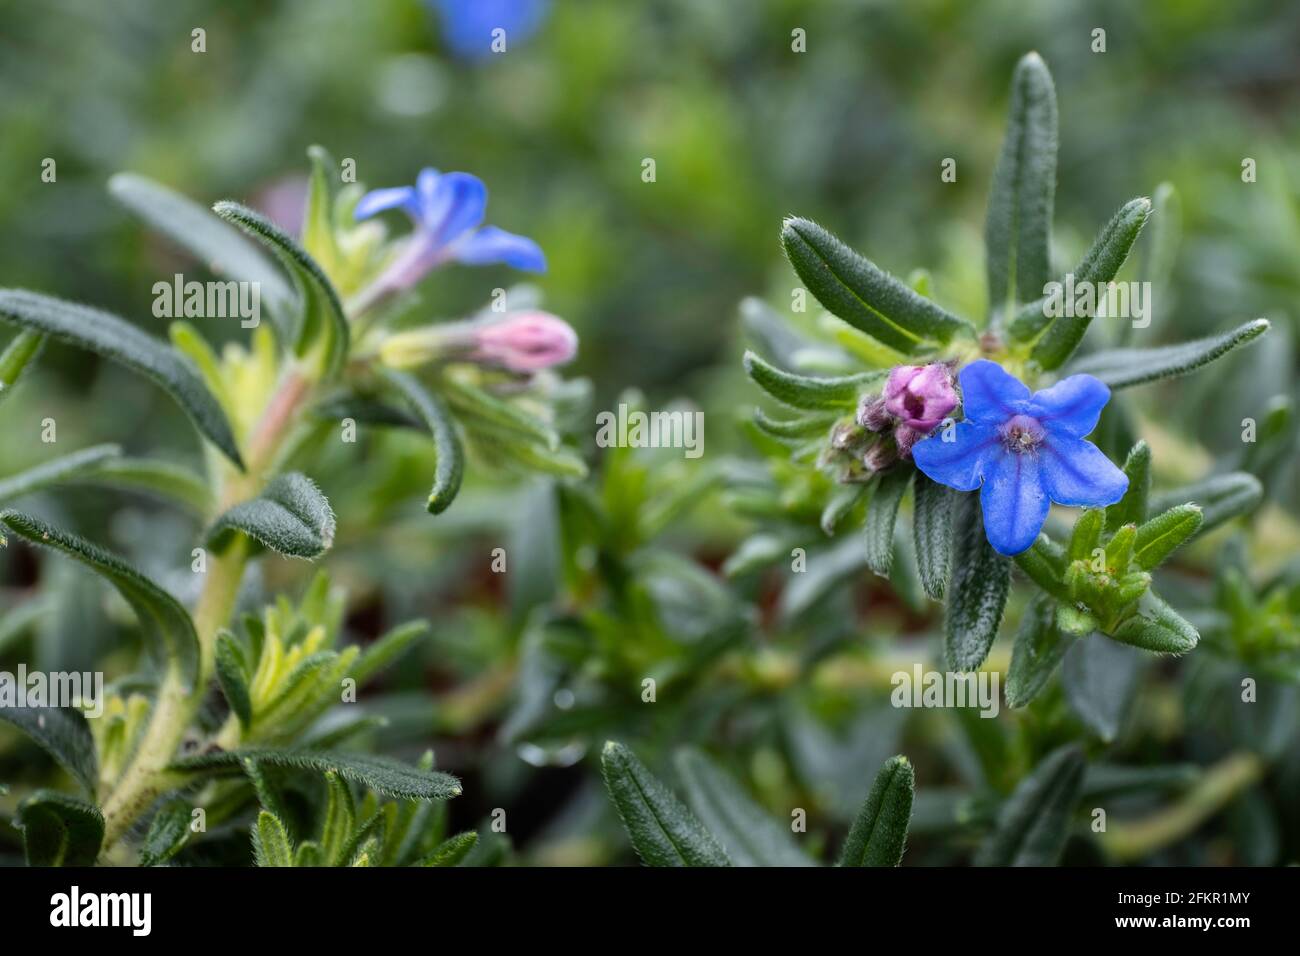 Macro photo of blue Lithodora diffusa or purple gromwell flowers in hairy evergreen leaves a garden, Narrow depth of field Stock Photo